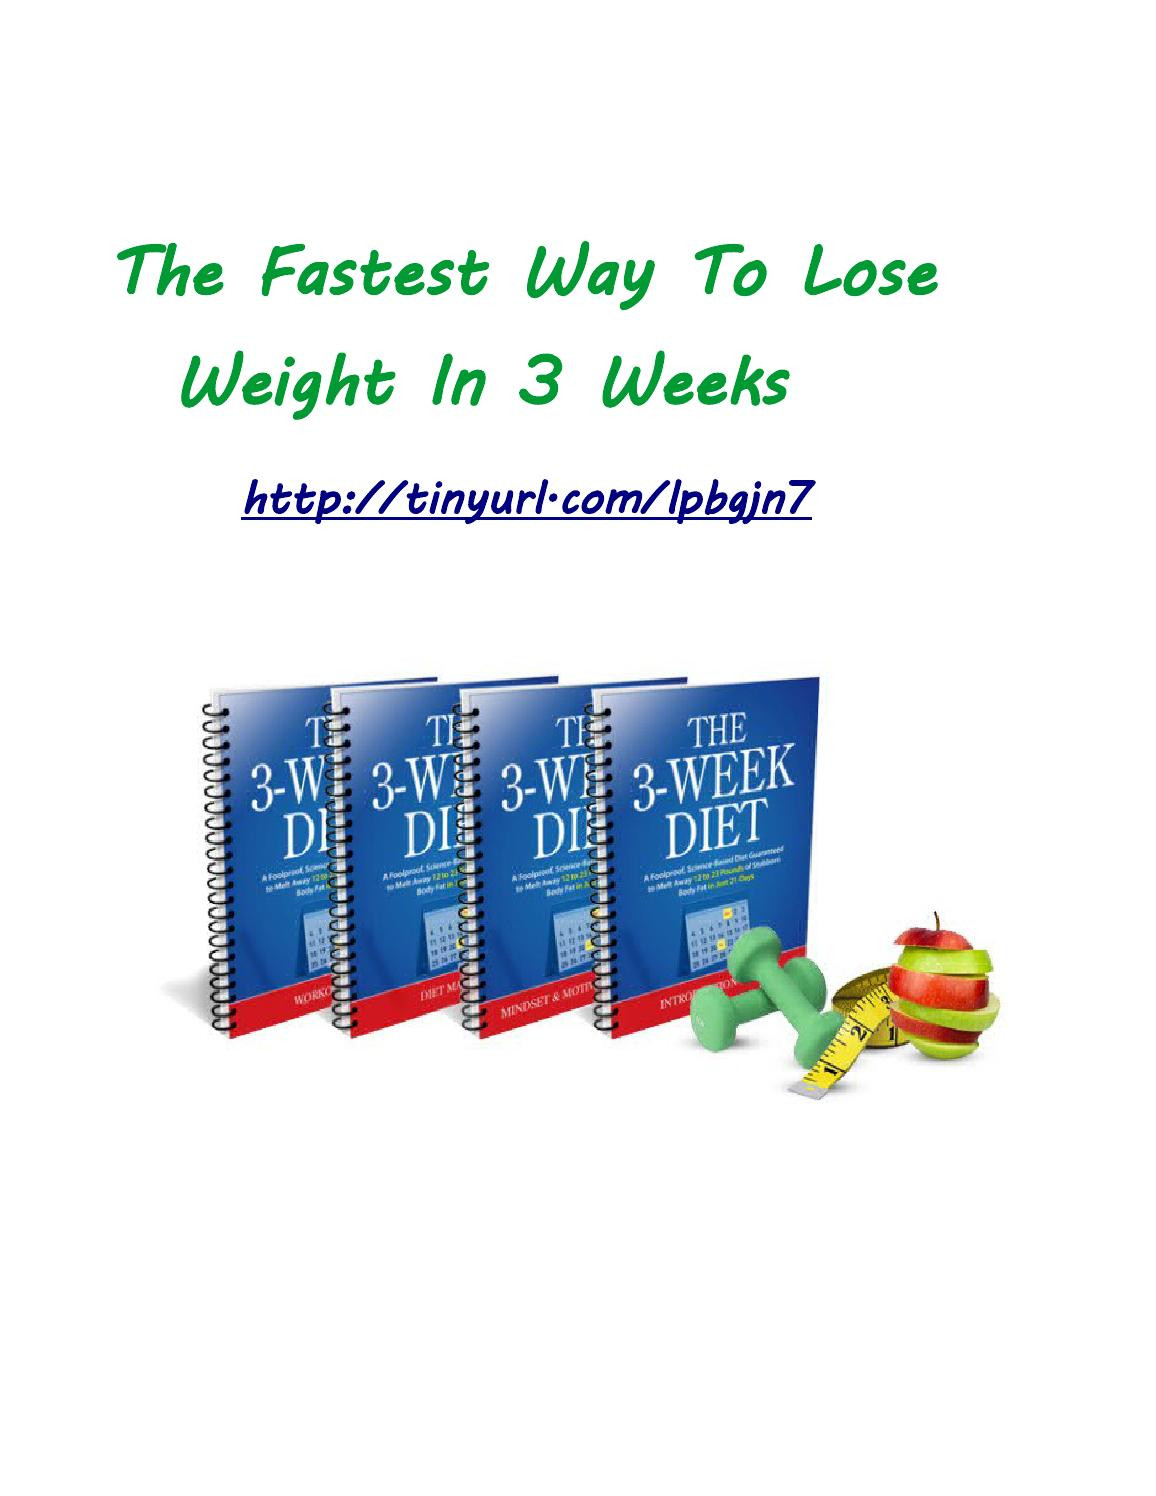 How To Lose Weight In 3 Weeks
 The fastest way to lose weight in 3 weeks by Vernette Ng